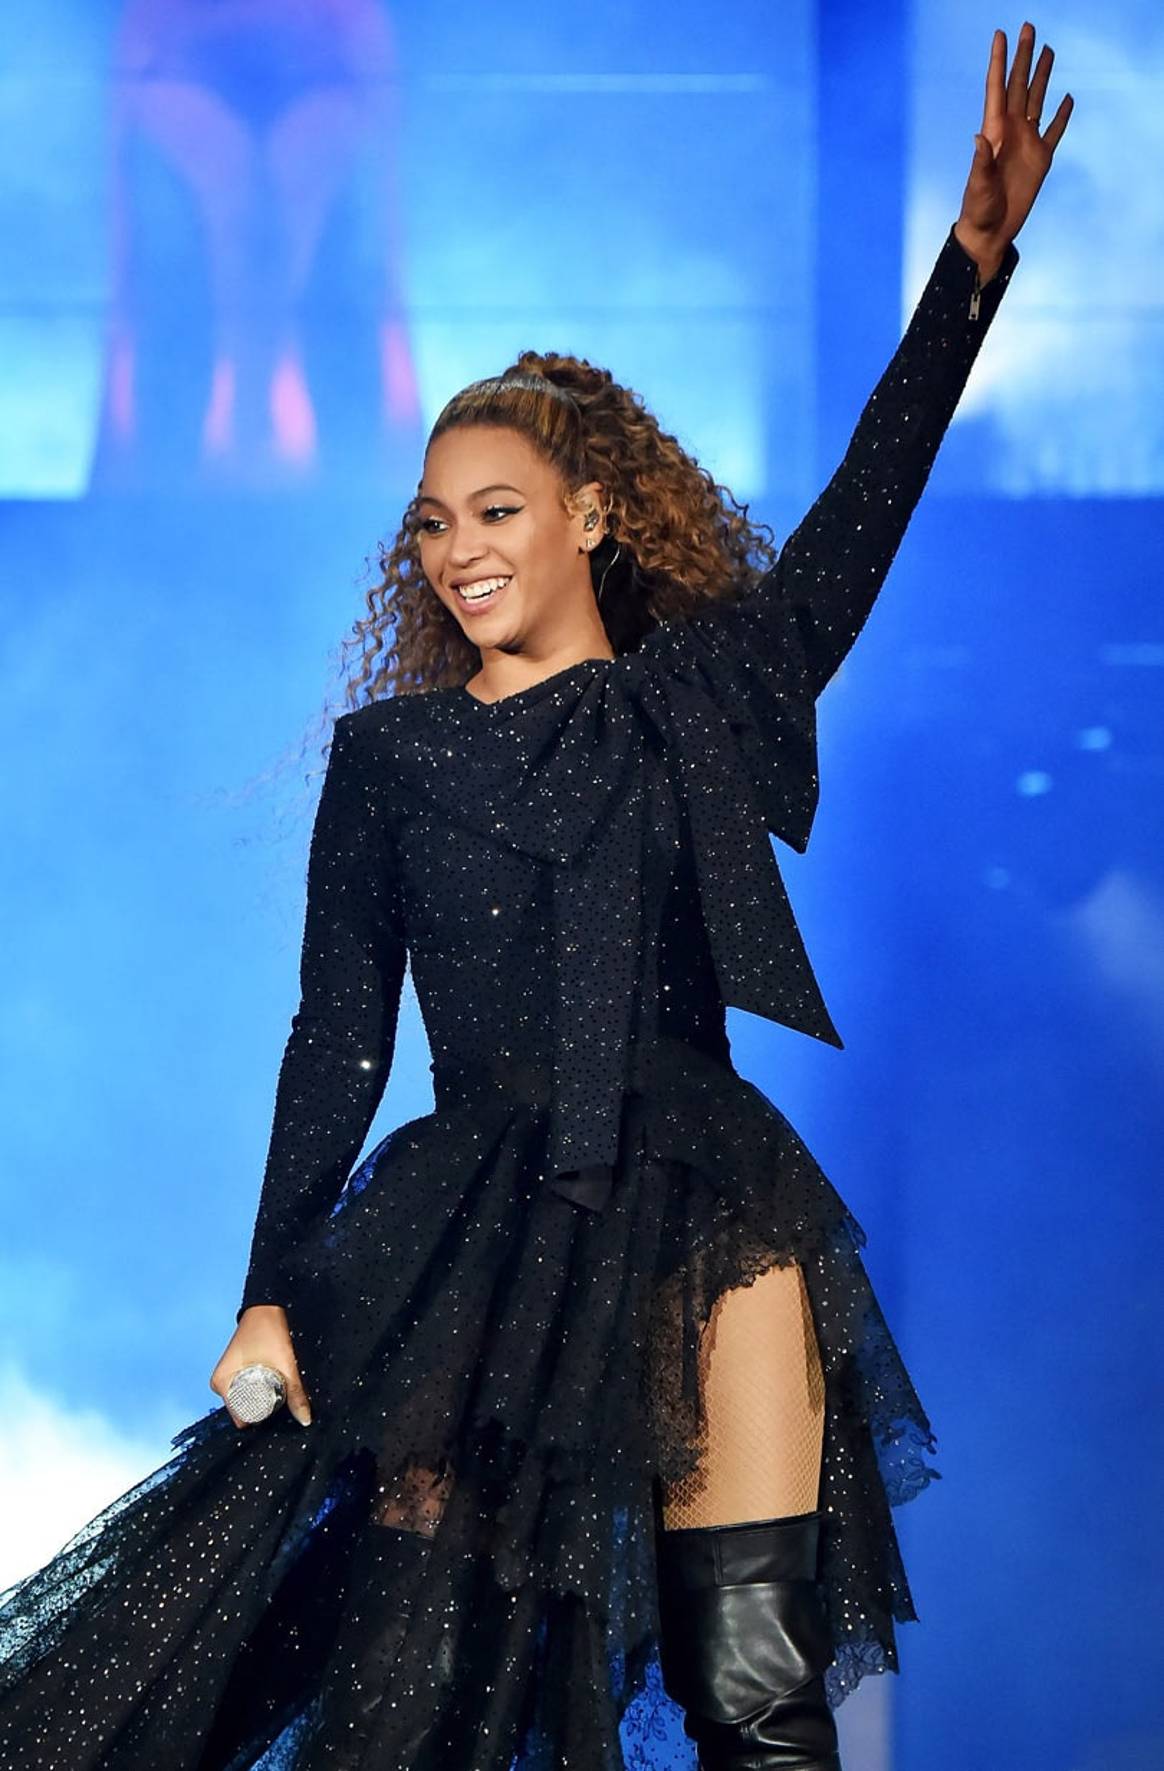 In Pictures: Givenchy dresses Beyoncé and Jay-Z tour